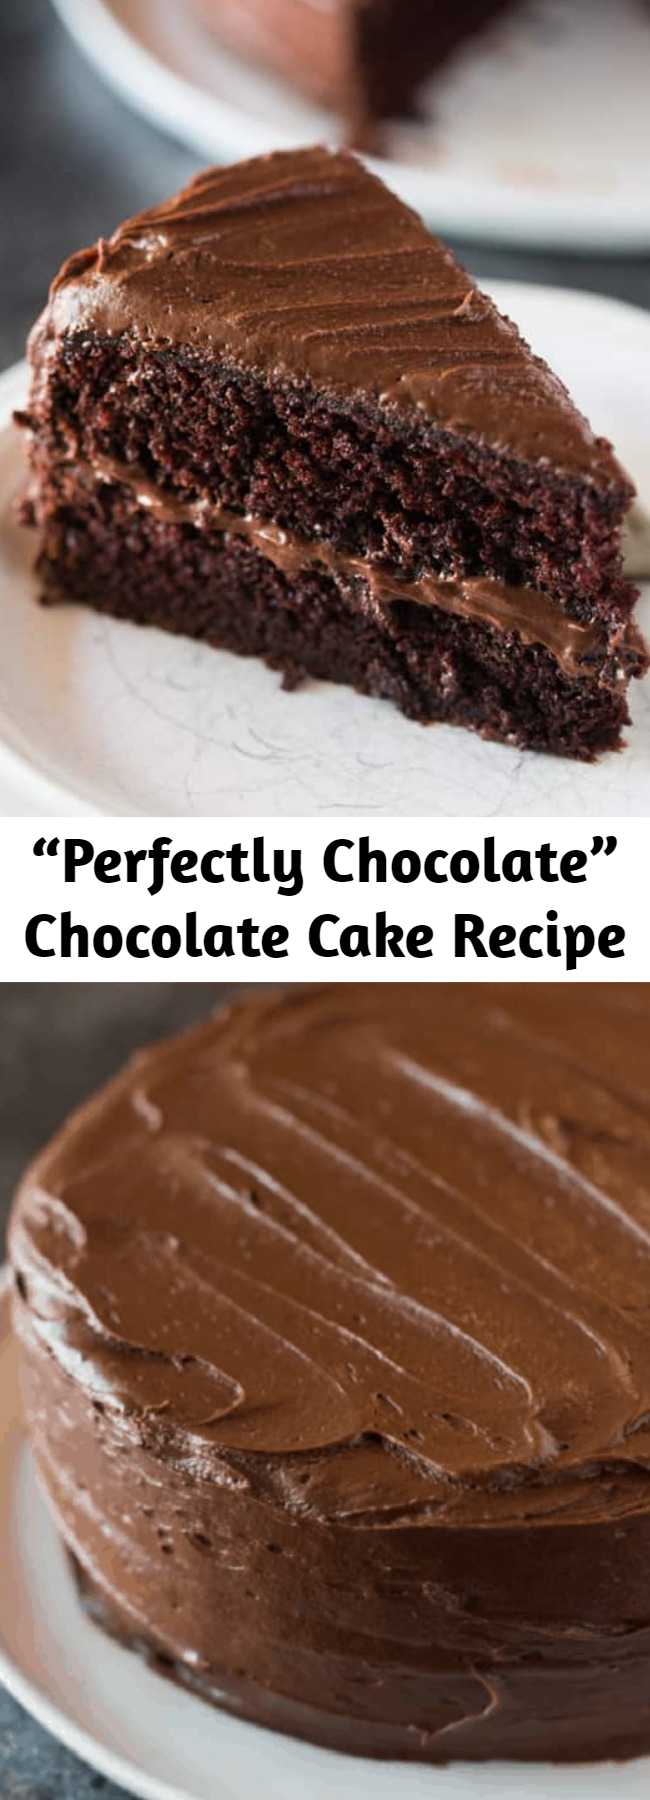 “Perfectly Chocolate” Chocolate Cake Recipe - Hershey’s “perfectly chocolate” Chocolate Cake with 5 ingredient chocolate frosting is our favorite homemade chocolate cake recipe! Extra moist, with a perfect rich chocolate flavor and tender, smooth crumb.